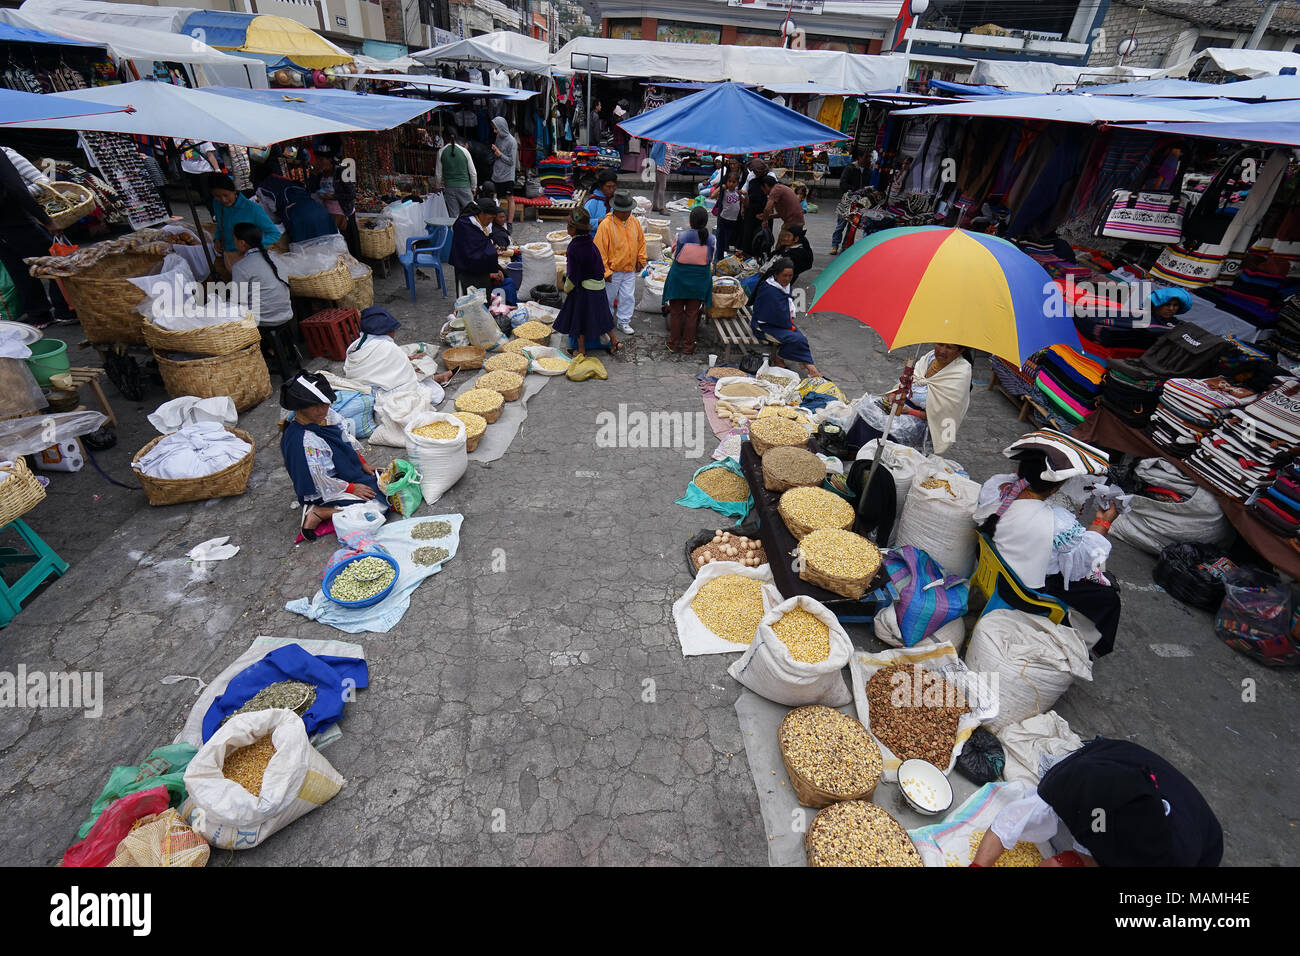 Otavalo, Ecuador-March 17, 2018: indigenous people selling produce in the Saturday market Stock Photo